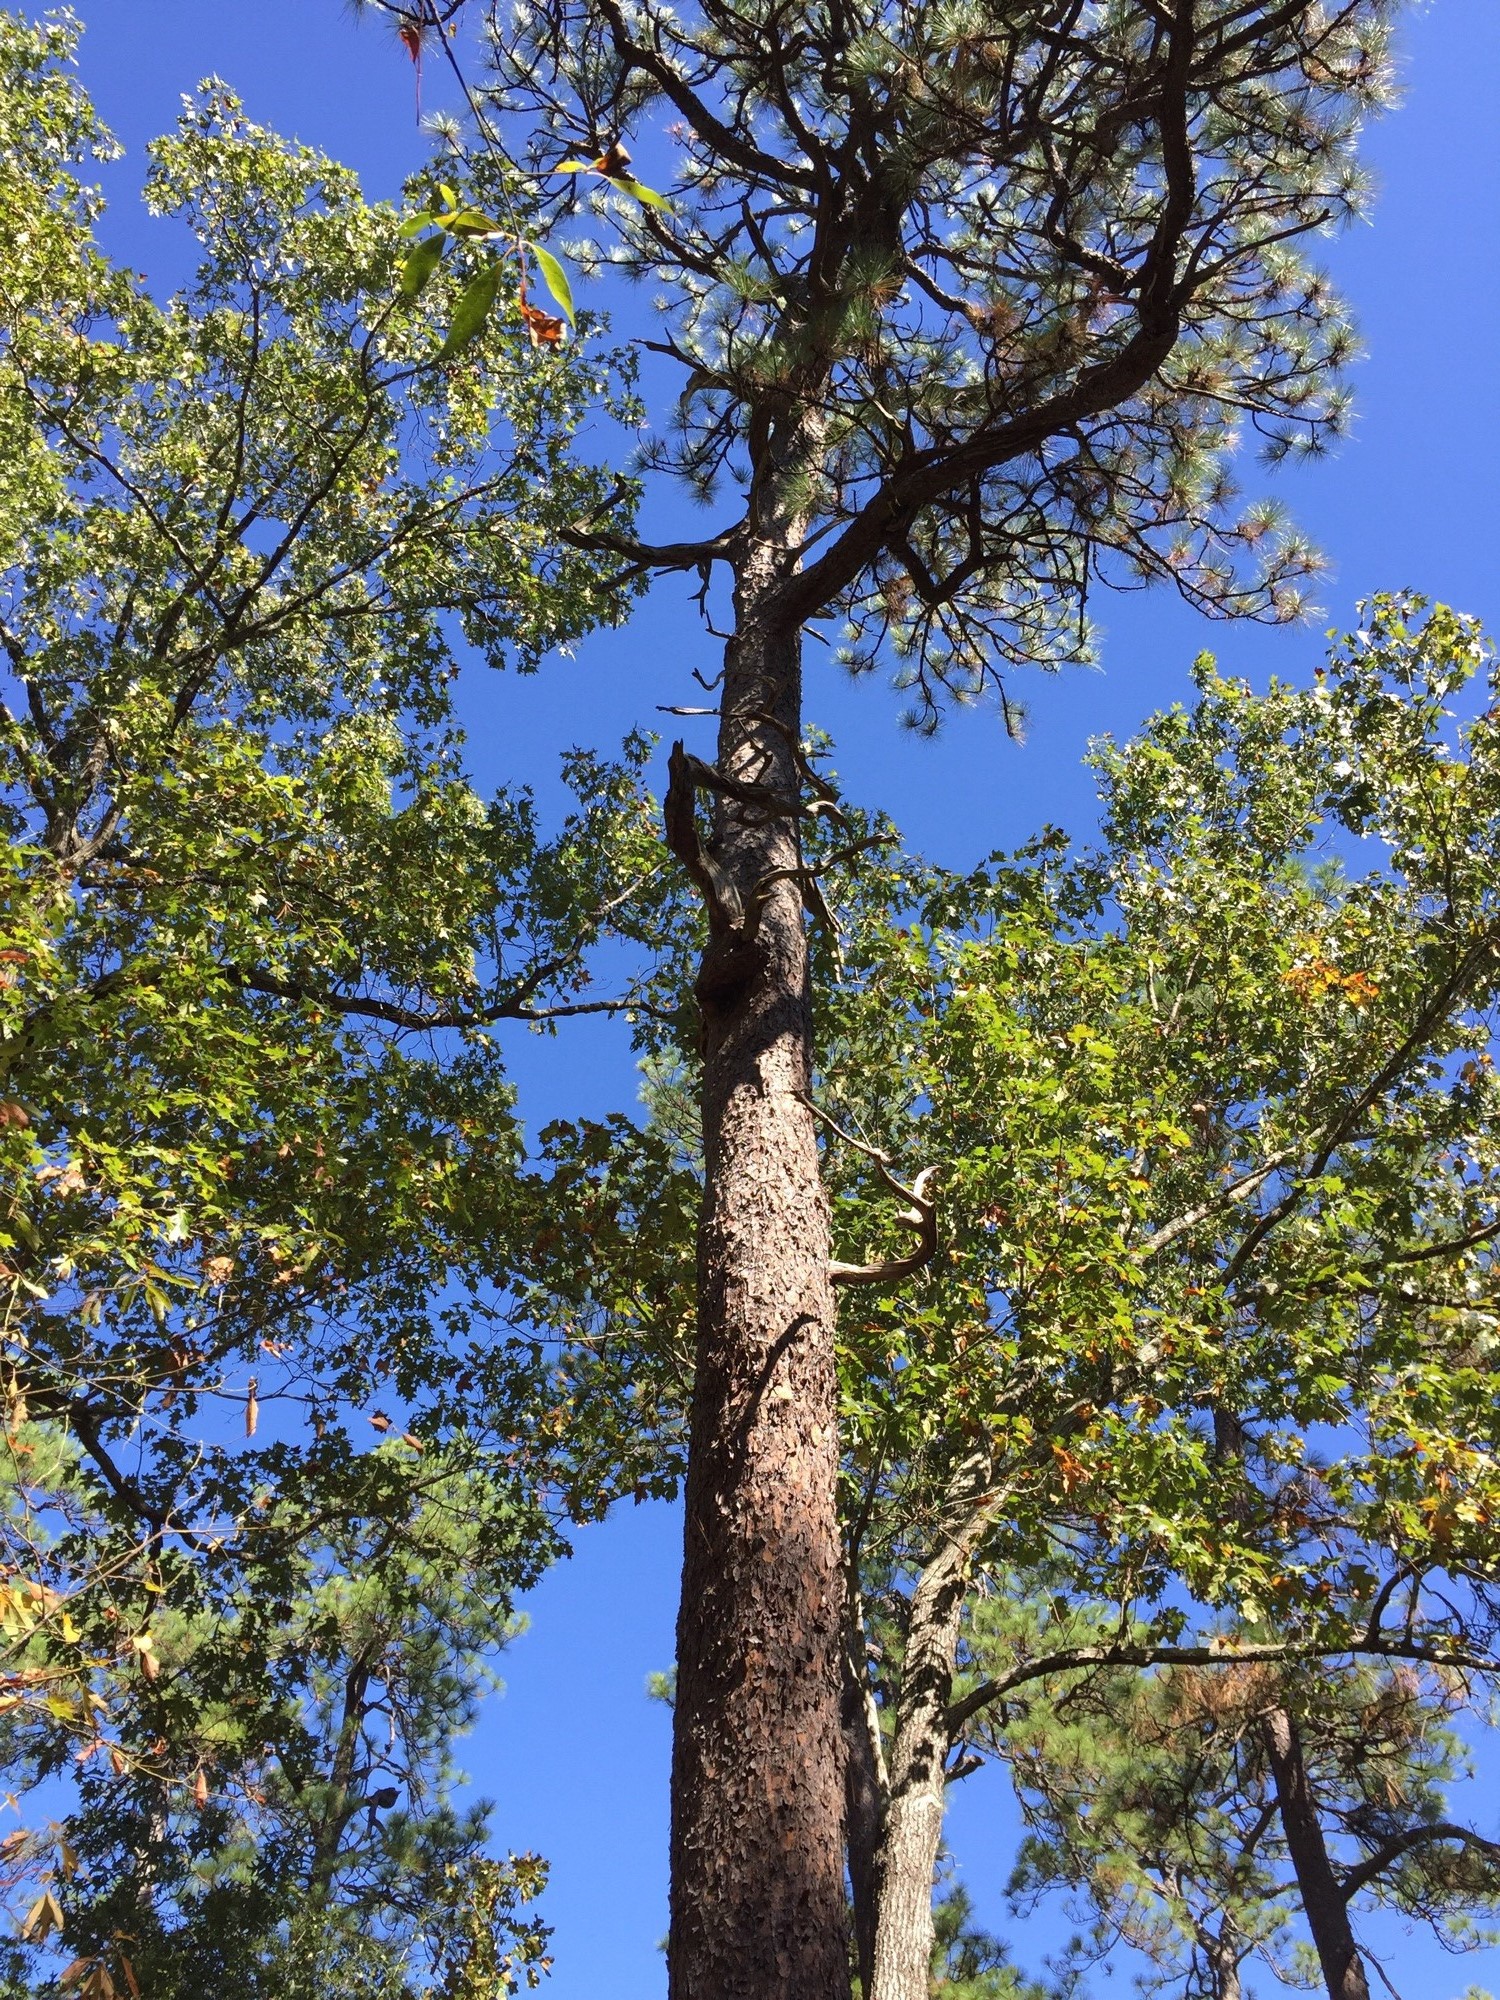 The estimated 469 year old longleaf pine - part of the Boyd tract of old-growth longleaf protected by the Boyd family. Photo Credit: Addie Thornton with SERPPAS